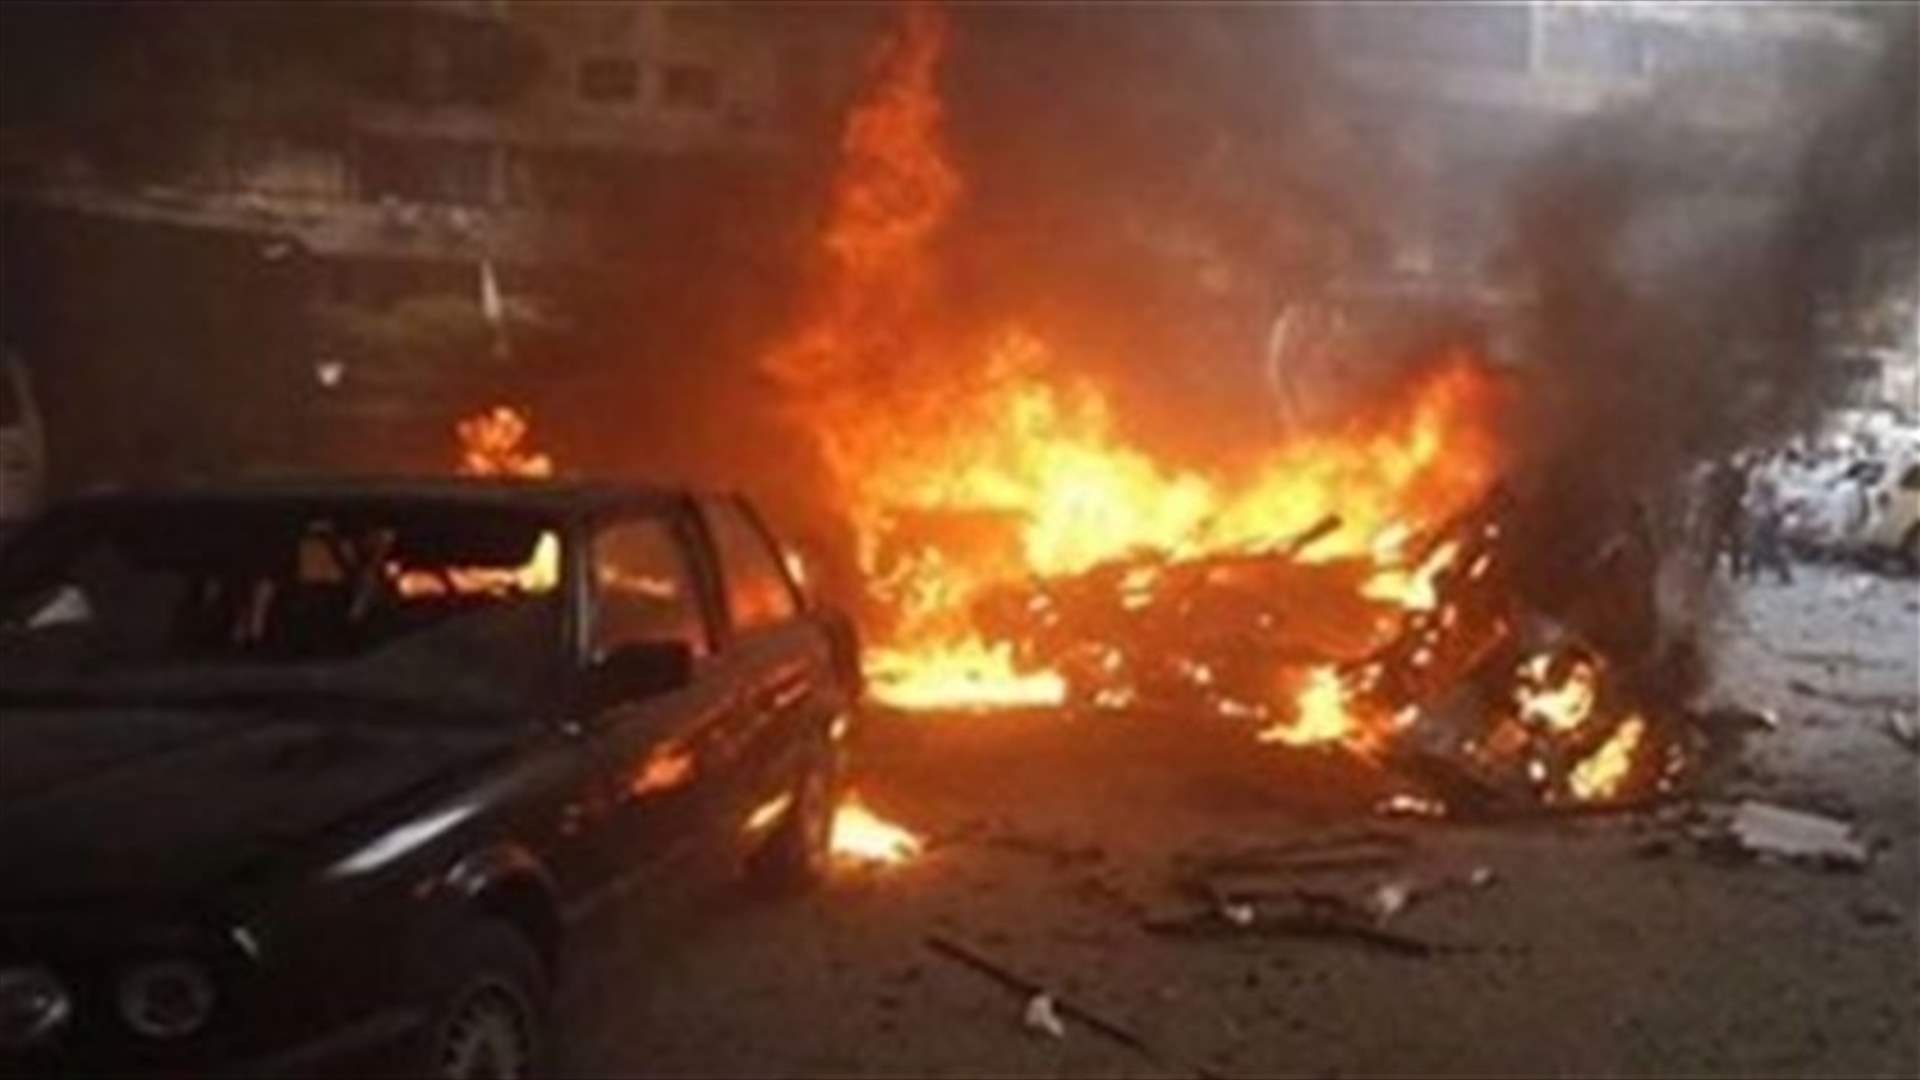 Car bomb explodes in central Tripoli, near Italy embassy - security official